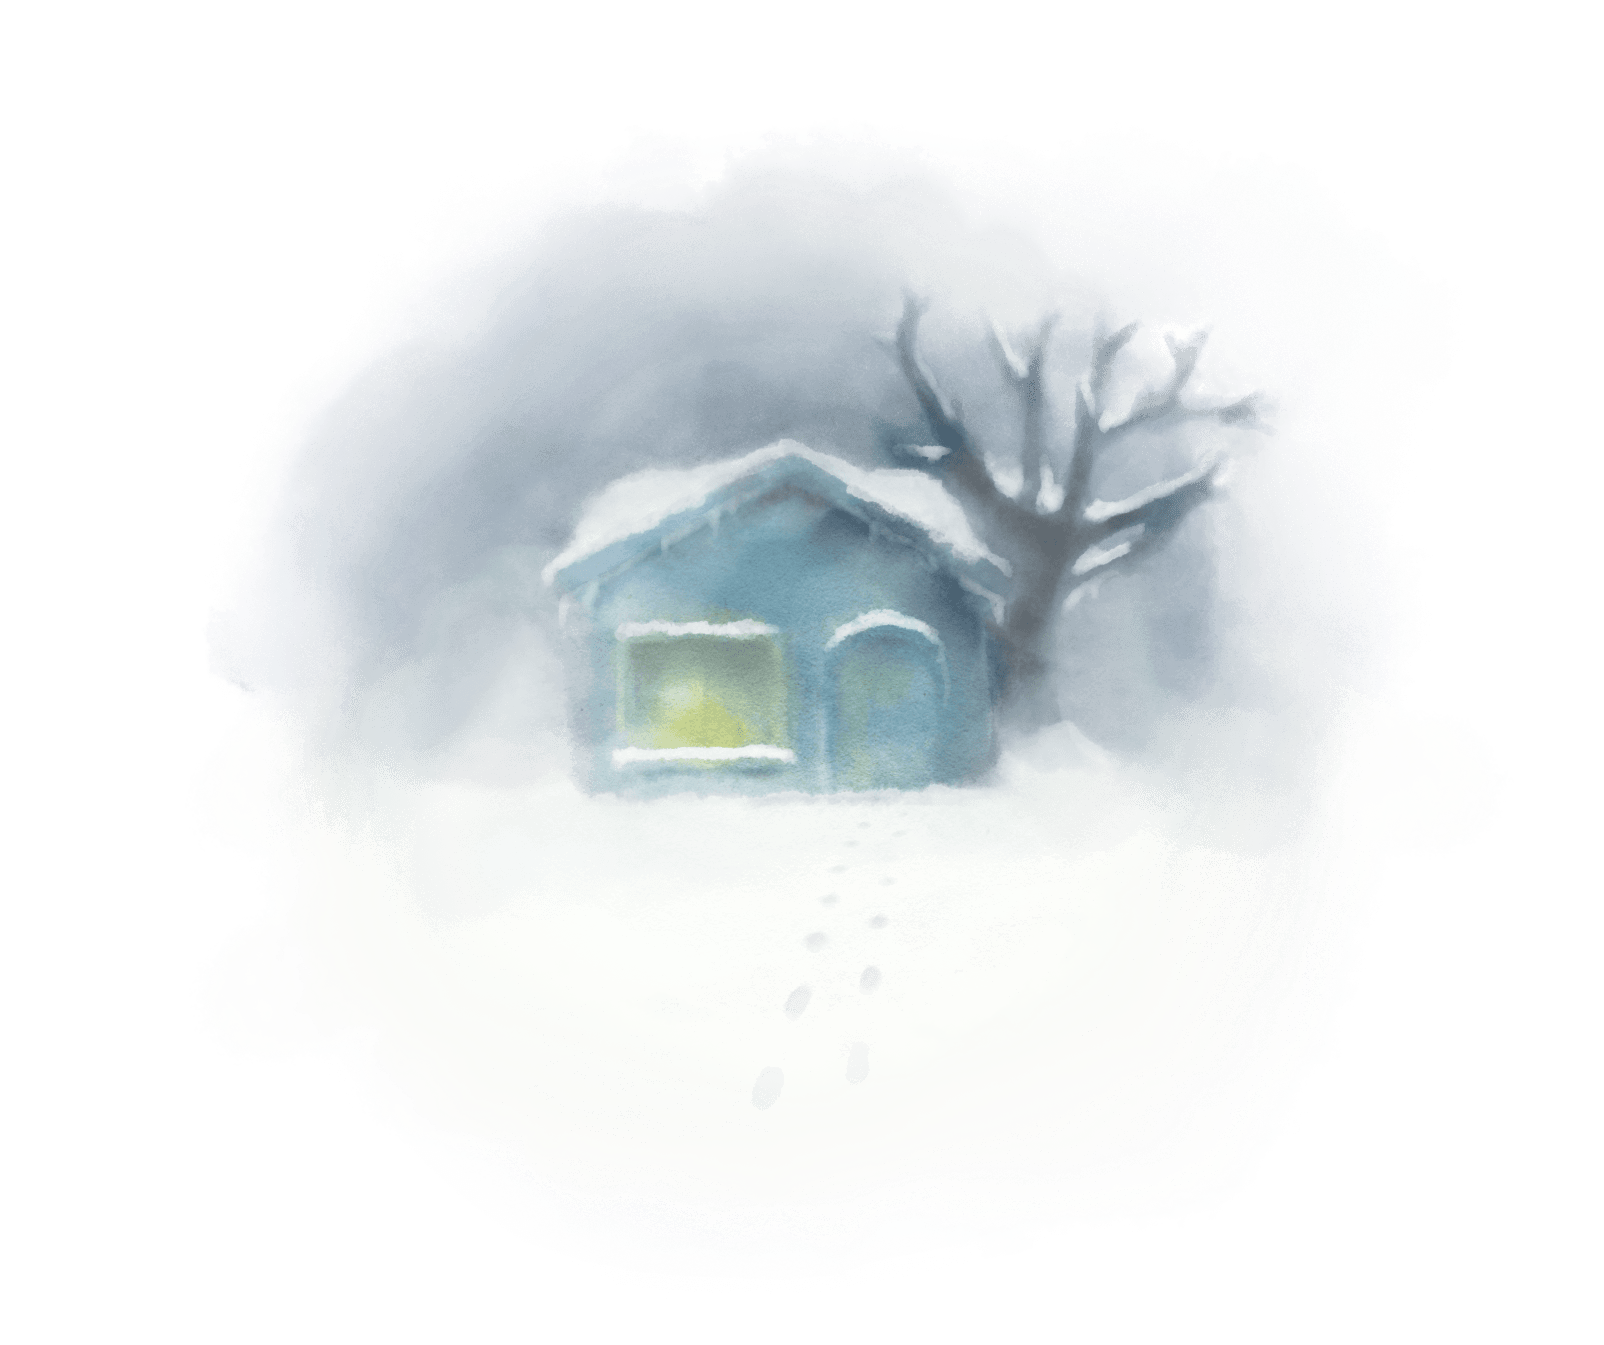 A house in the snow, footsteps leading away from the door.